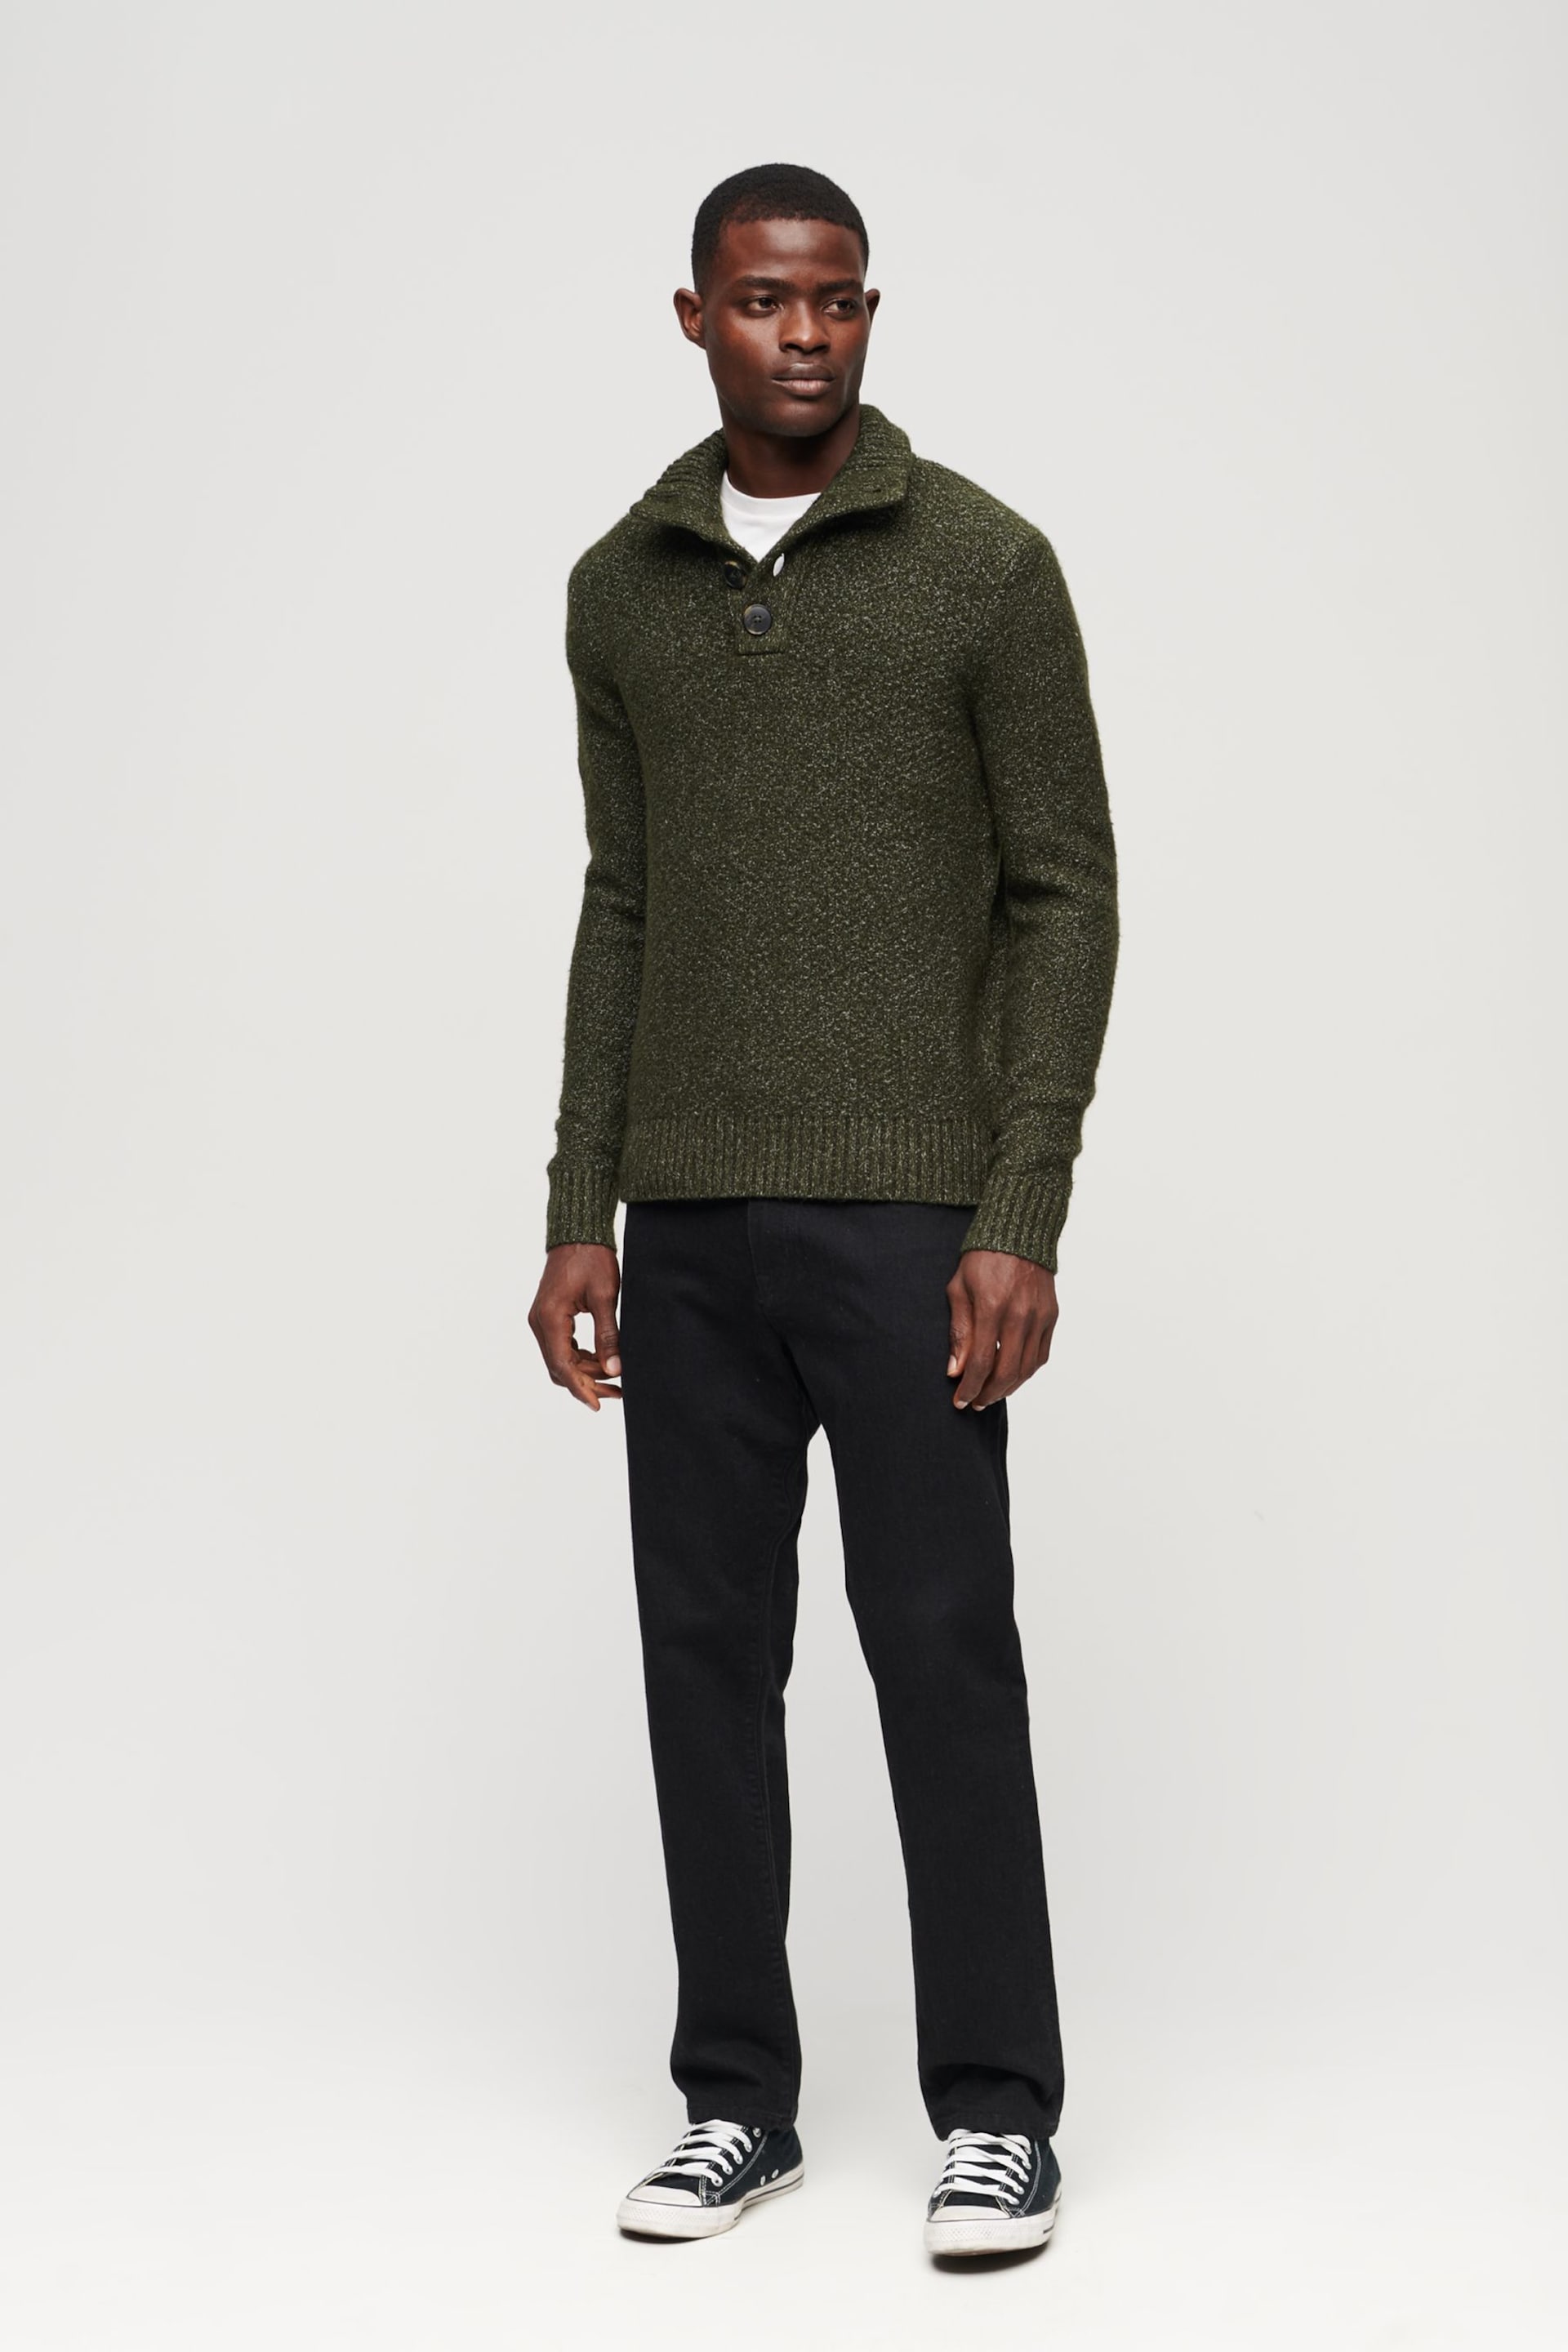 Superdry Green Chunky Button High Neck Jumper - Image 2 of 6